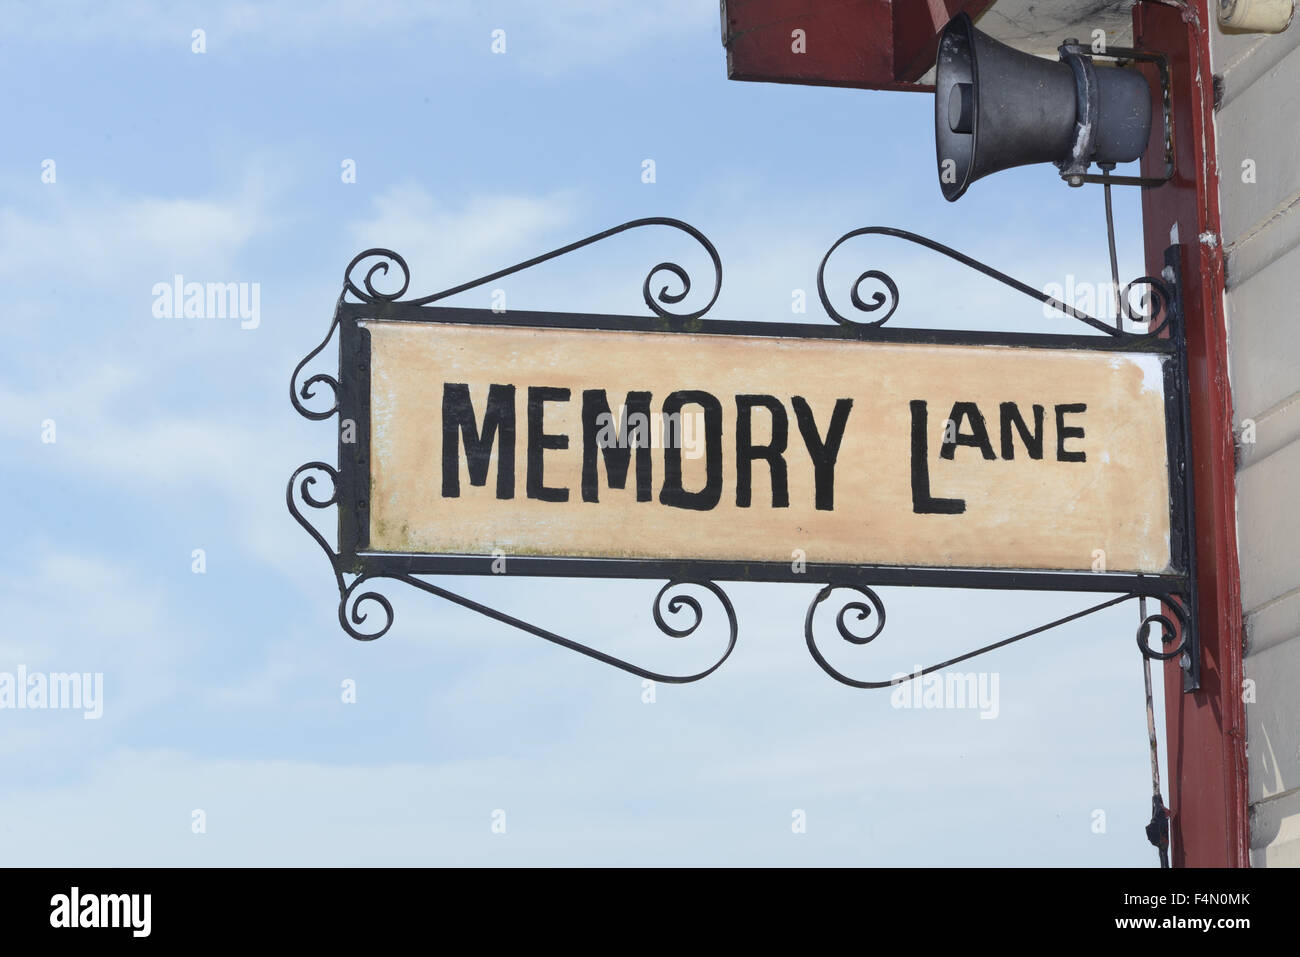 Hand-painted sign for Memory Lane Stock Photo